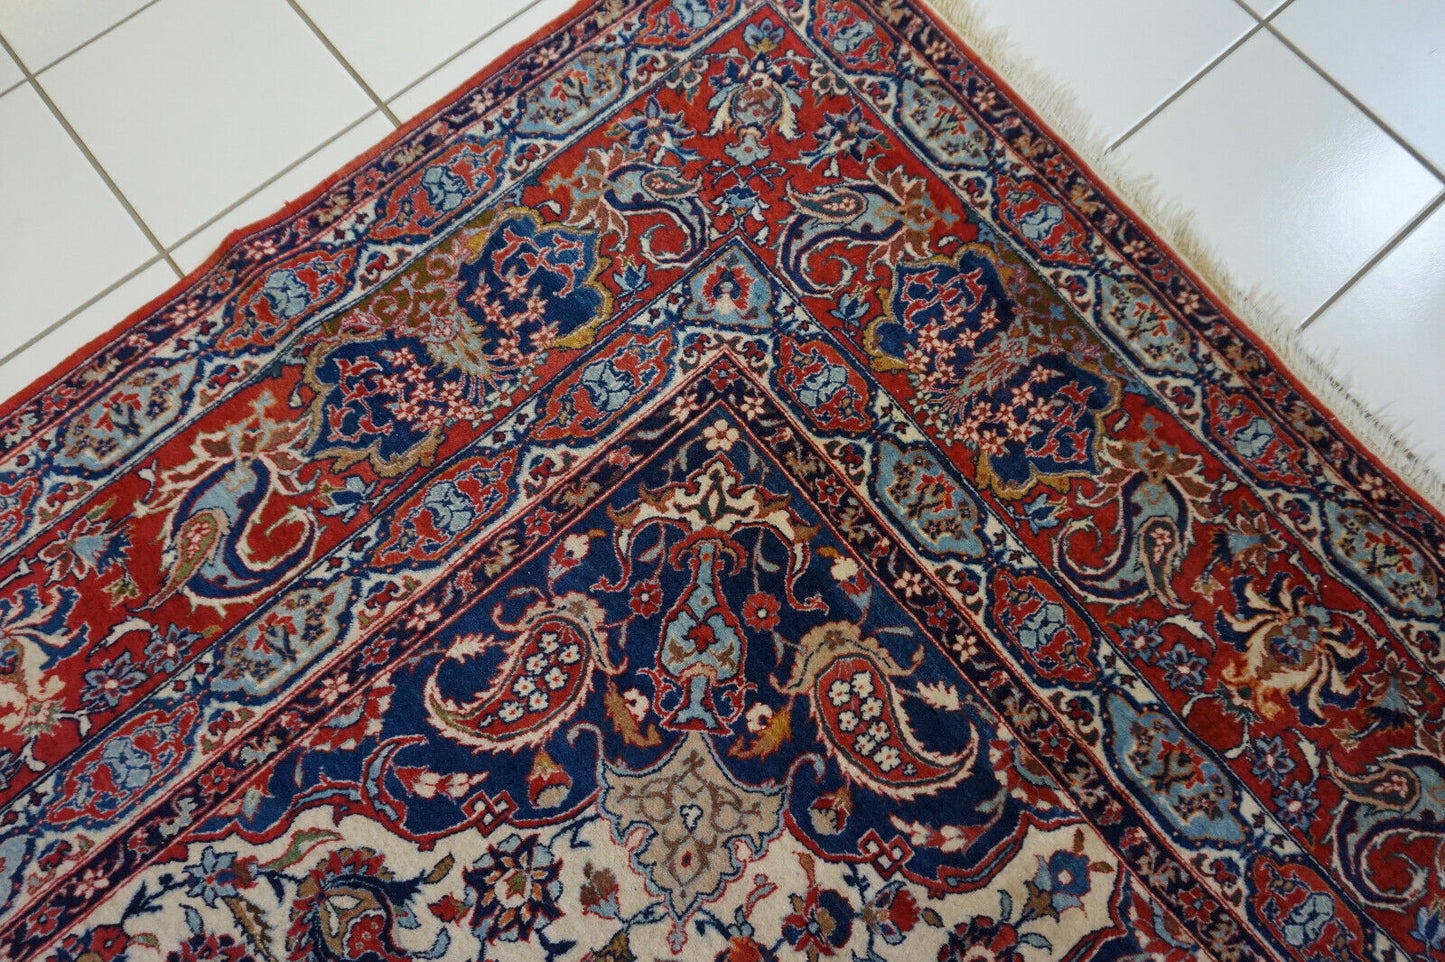 Close-up of the deep red hues on the Handmade Antique Persian Style Isfahan Rug